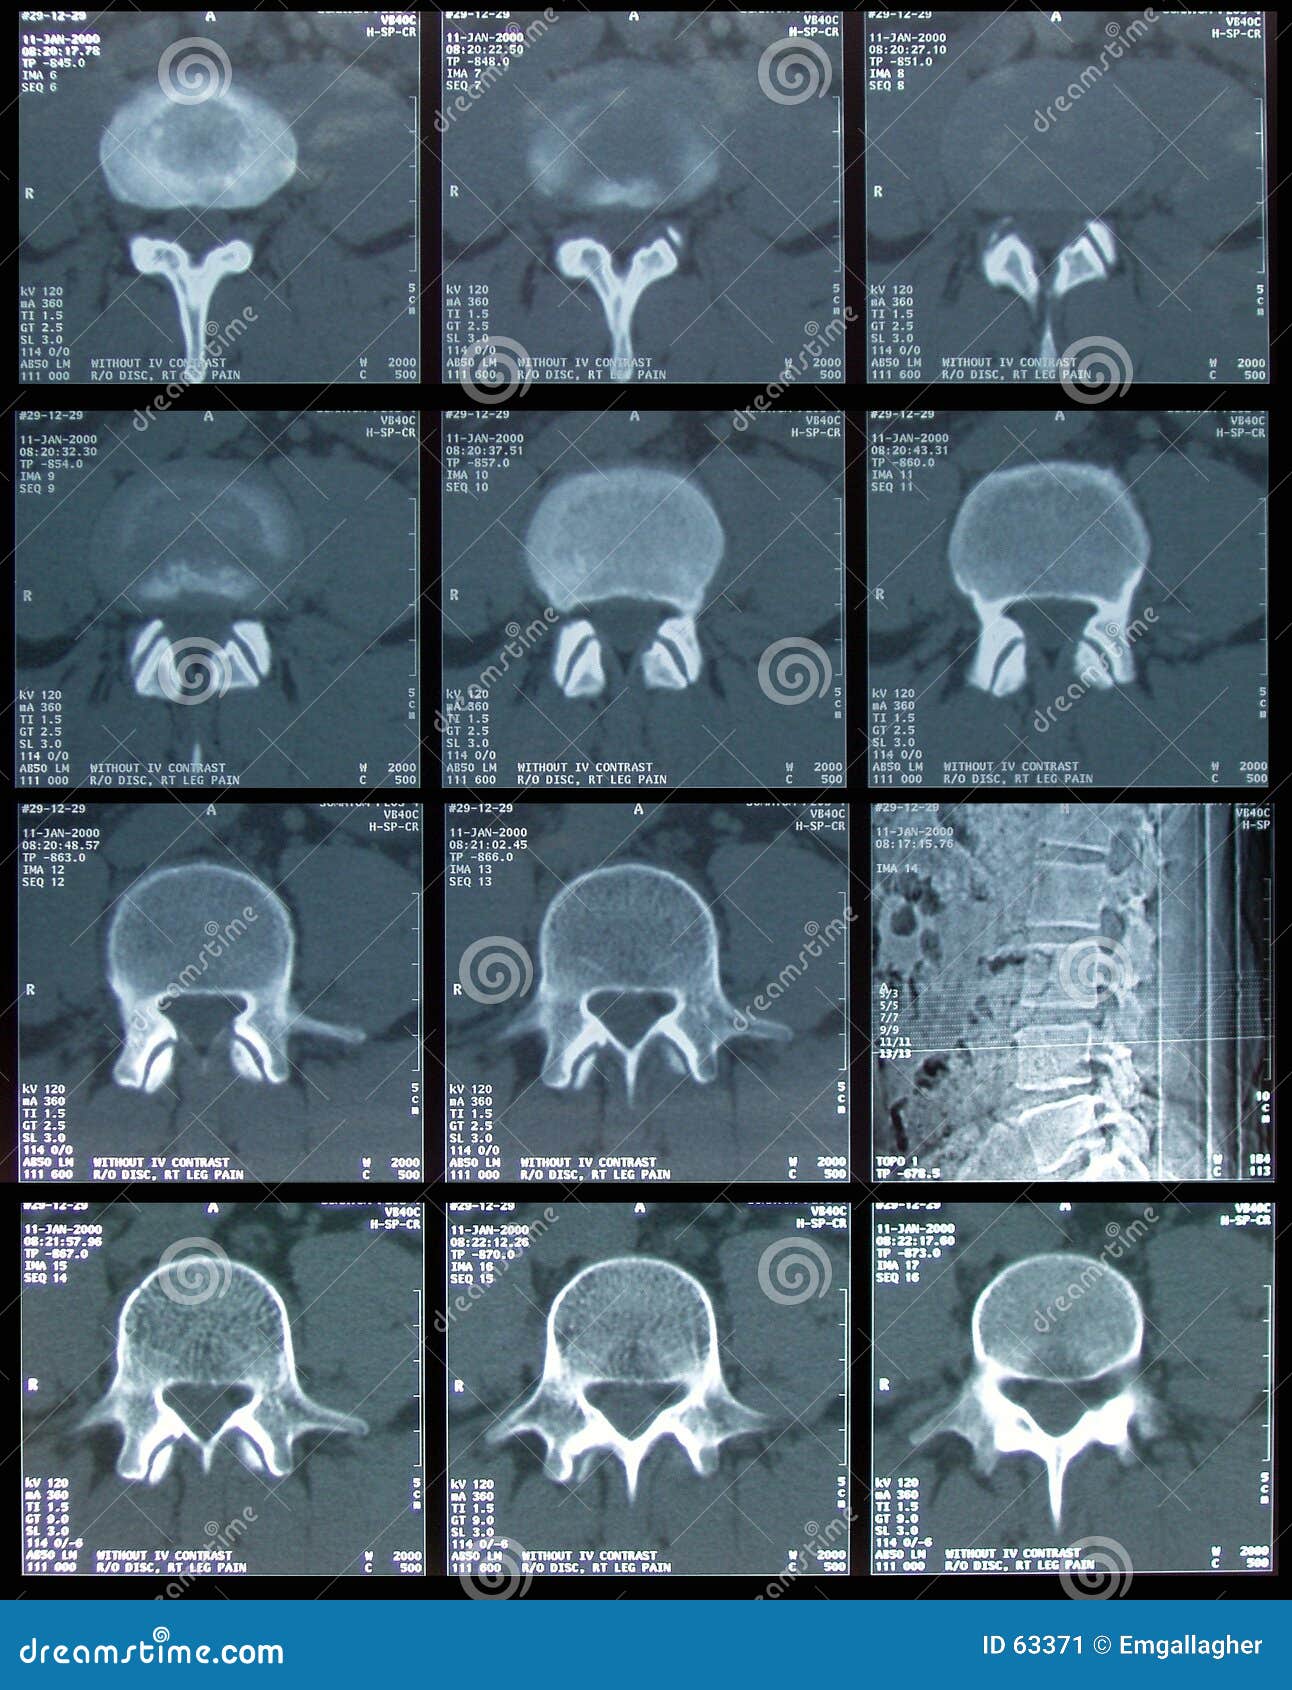 ct scan of spine